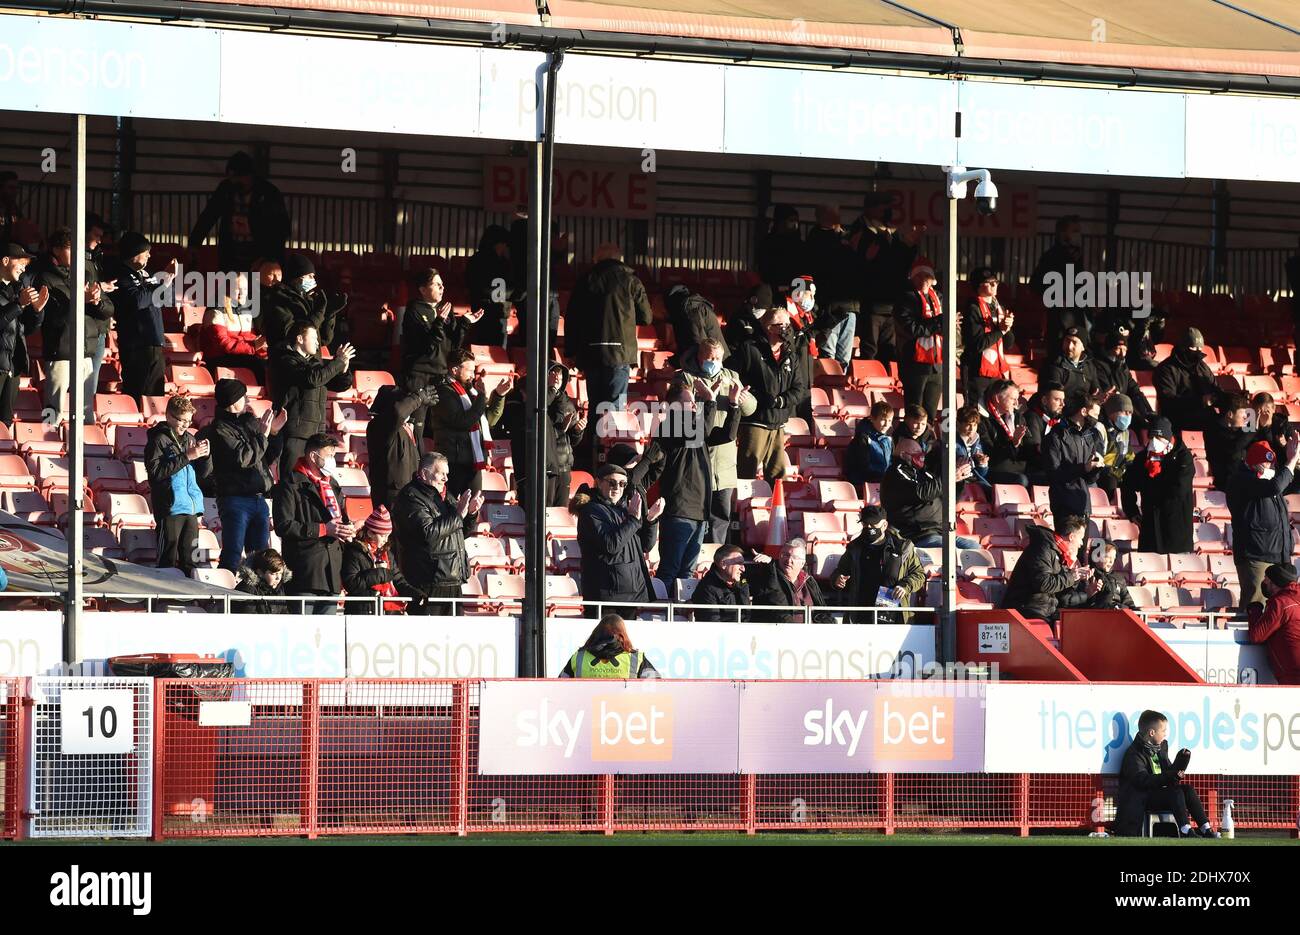 Crawley UK 12th December 2020 -  Crawley fans watch the Sky Bet EFL League Two match between Crawley Town and Barrow AFC  at the People's Pension Stadium - Editorial use only. No merchandising.  - for details contact Football Dataco  : Stock Photo